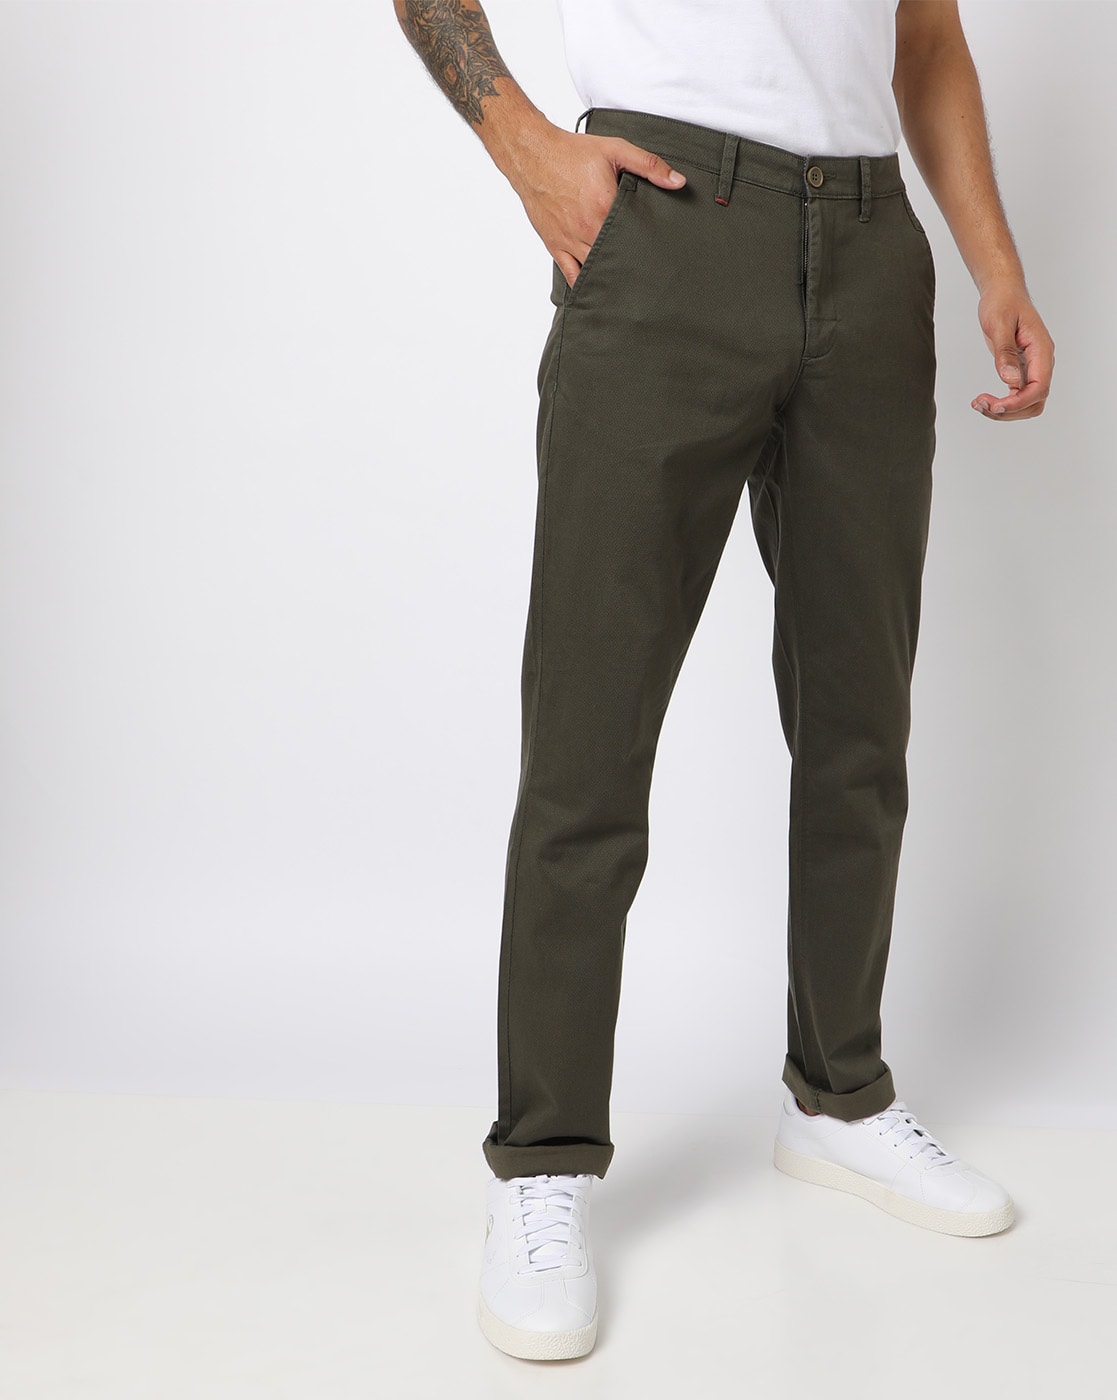 Cotton Men Imported Fabric Bottle Green Pant